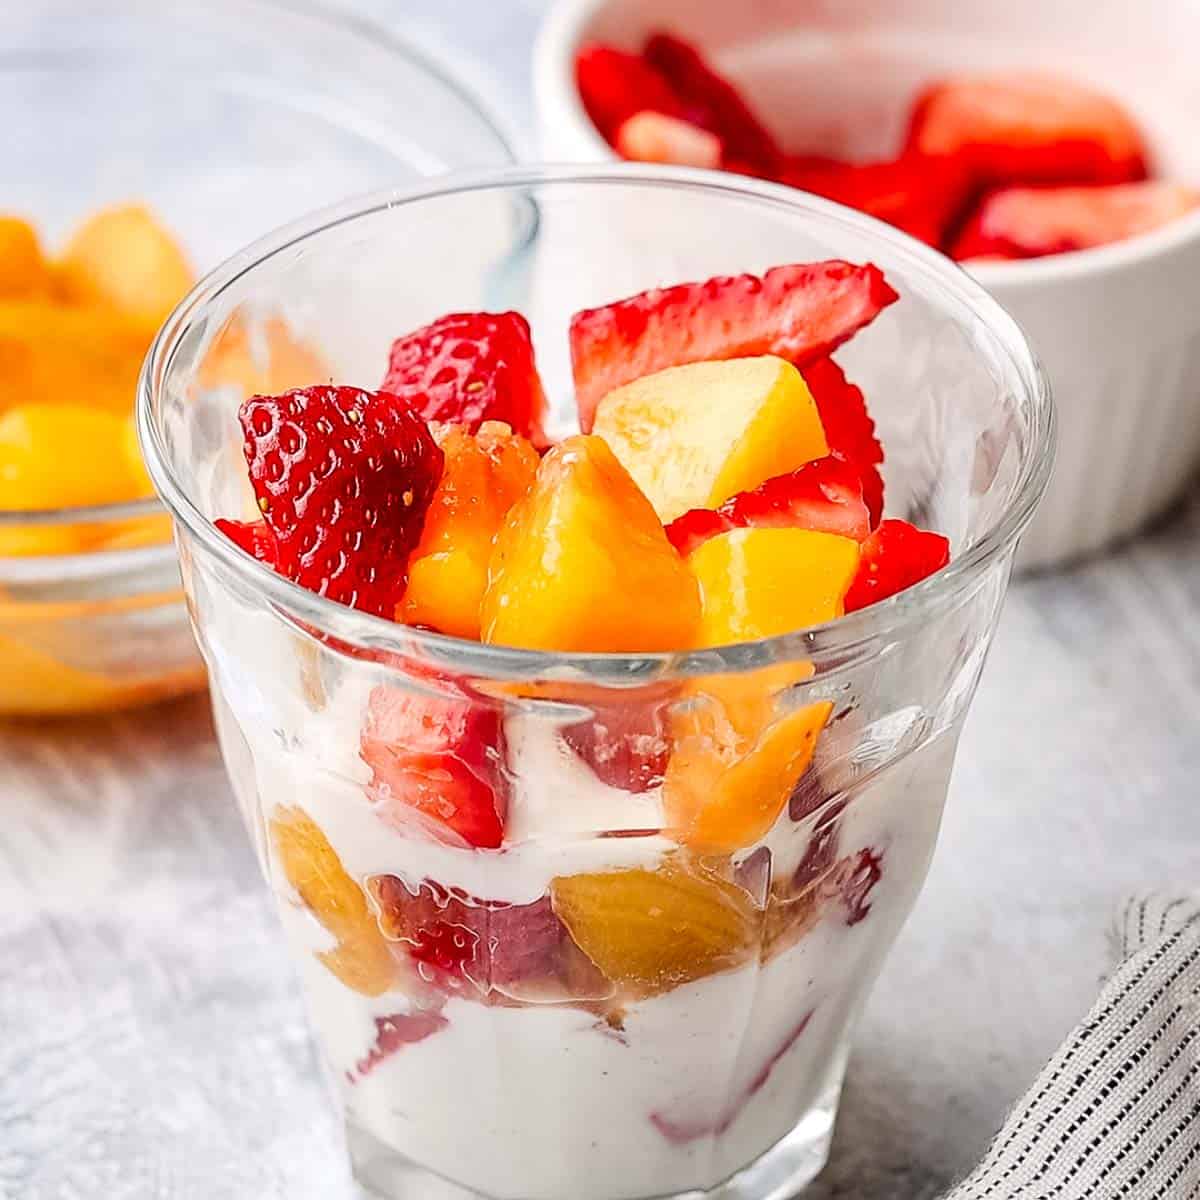 two layers of yogurt and fresh fruit in a small serving container